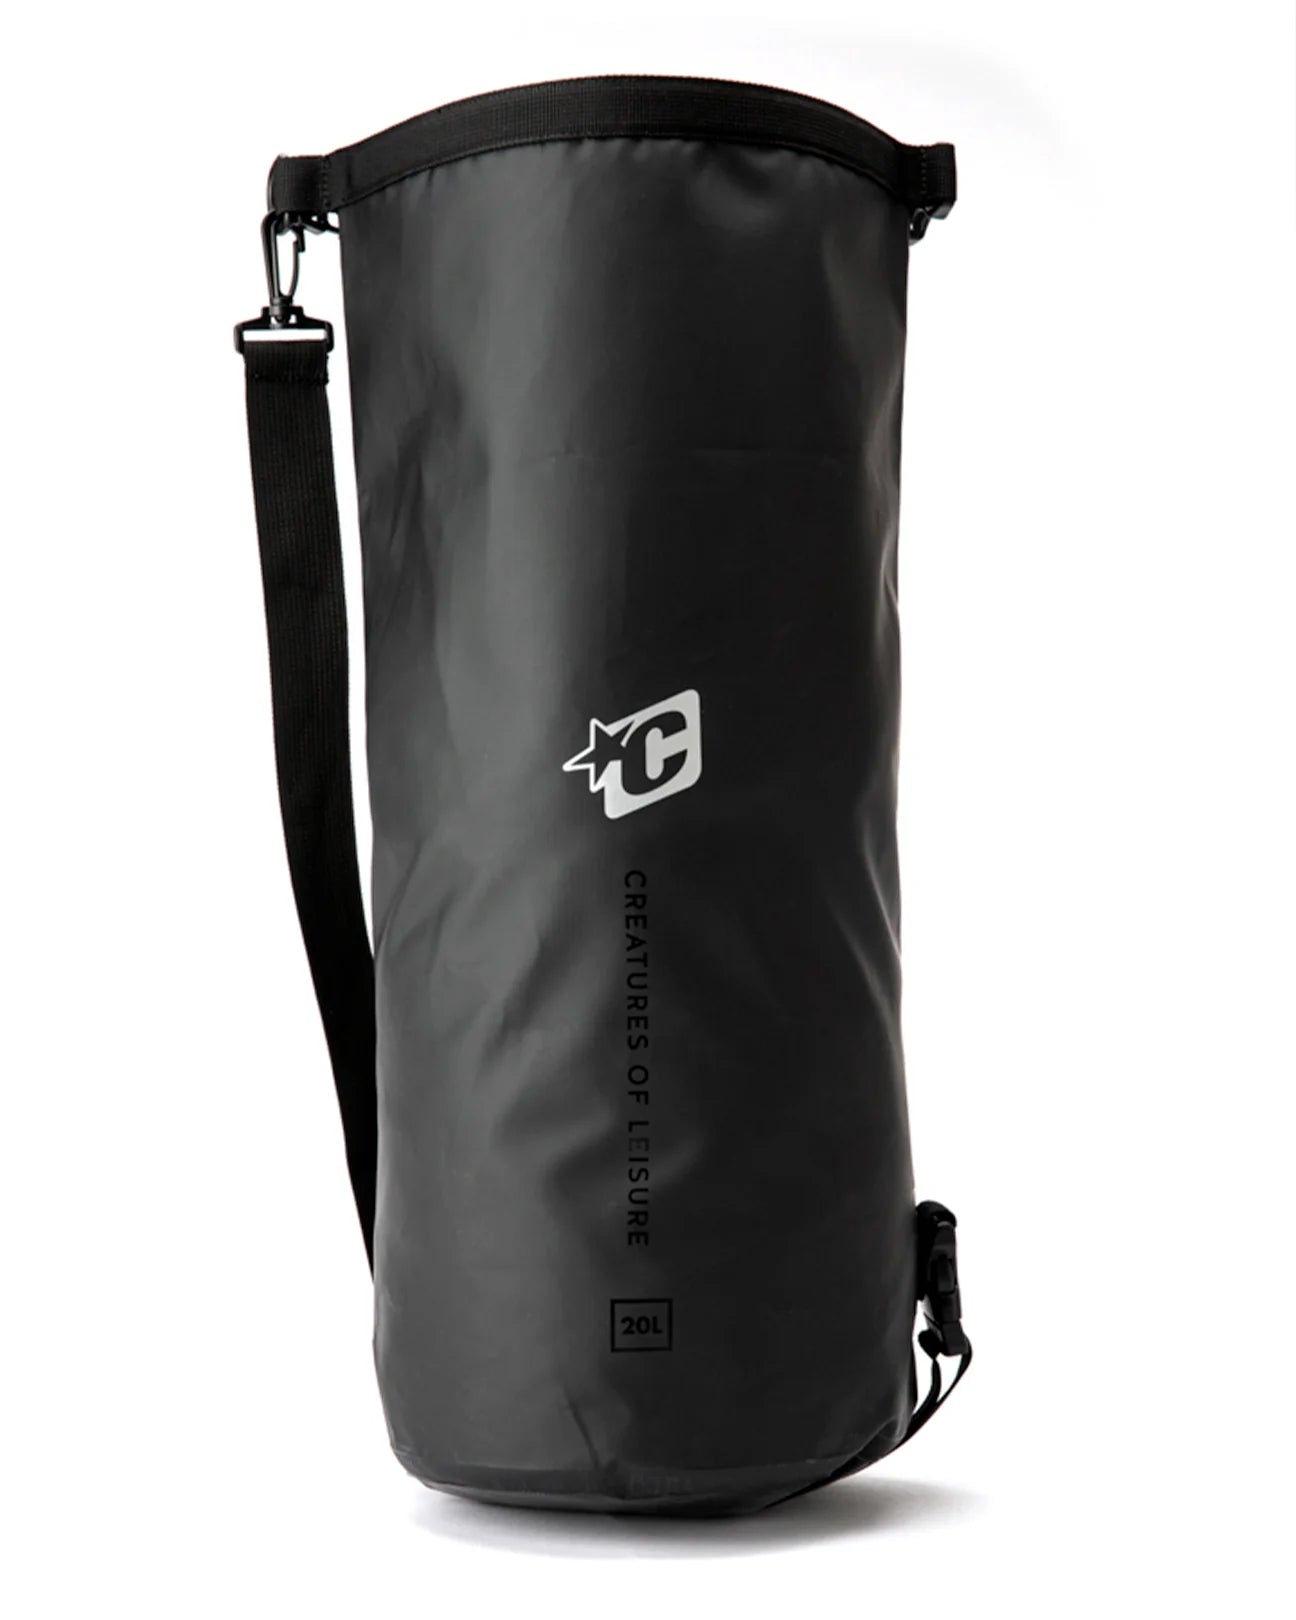 DAY USE DRY BAG